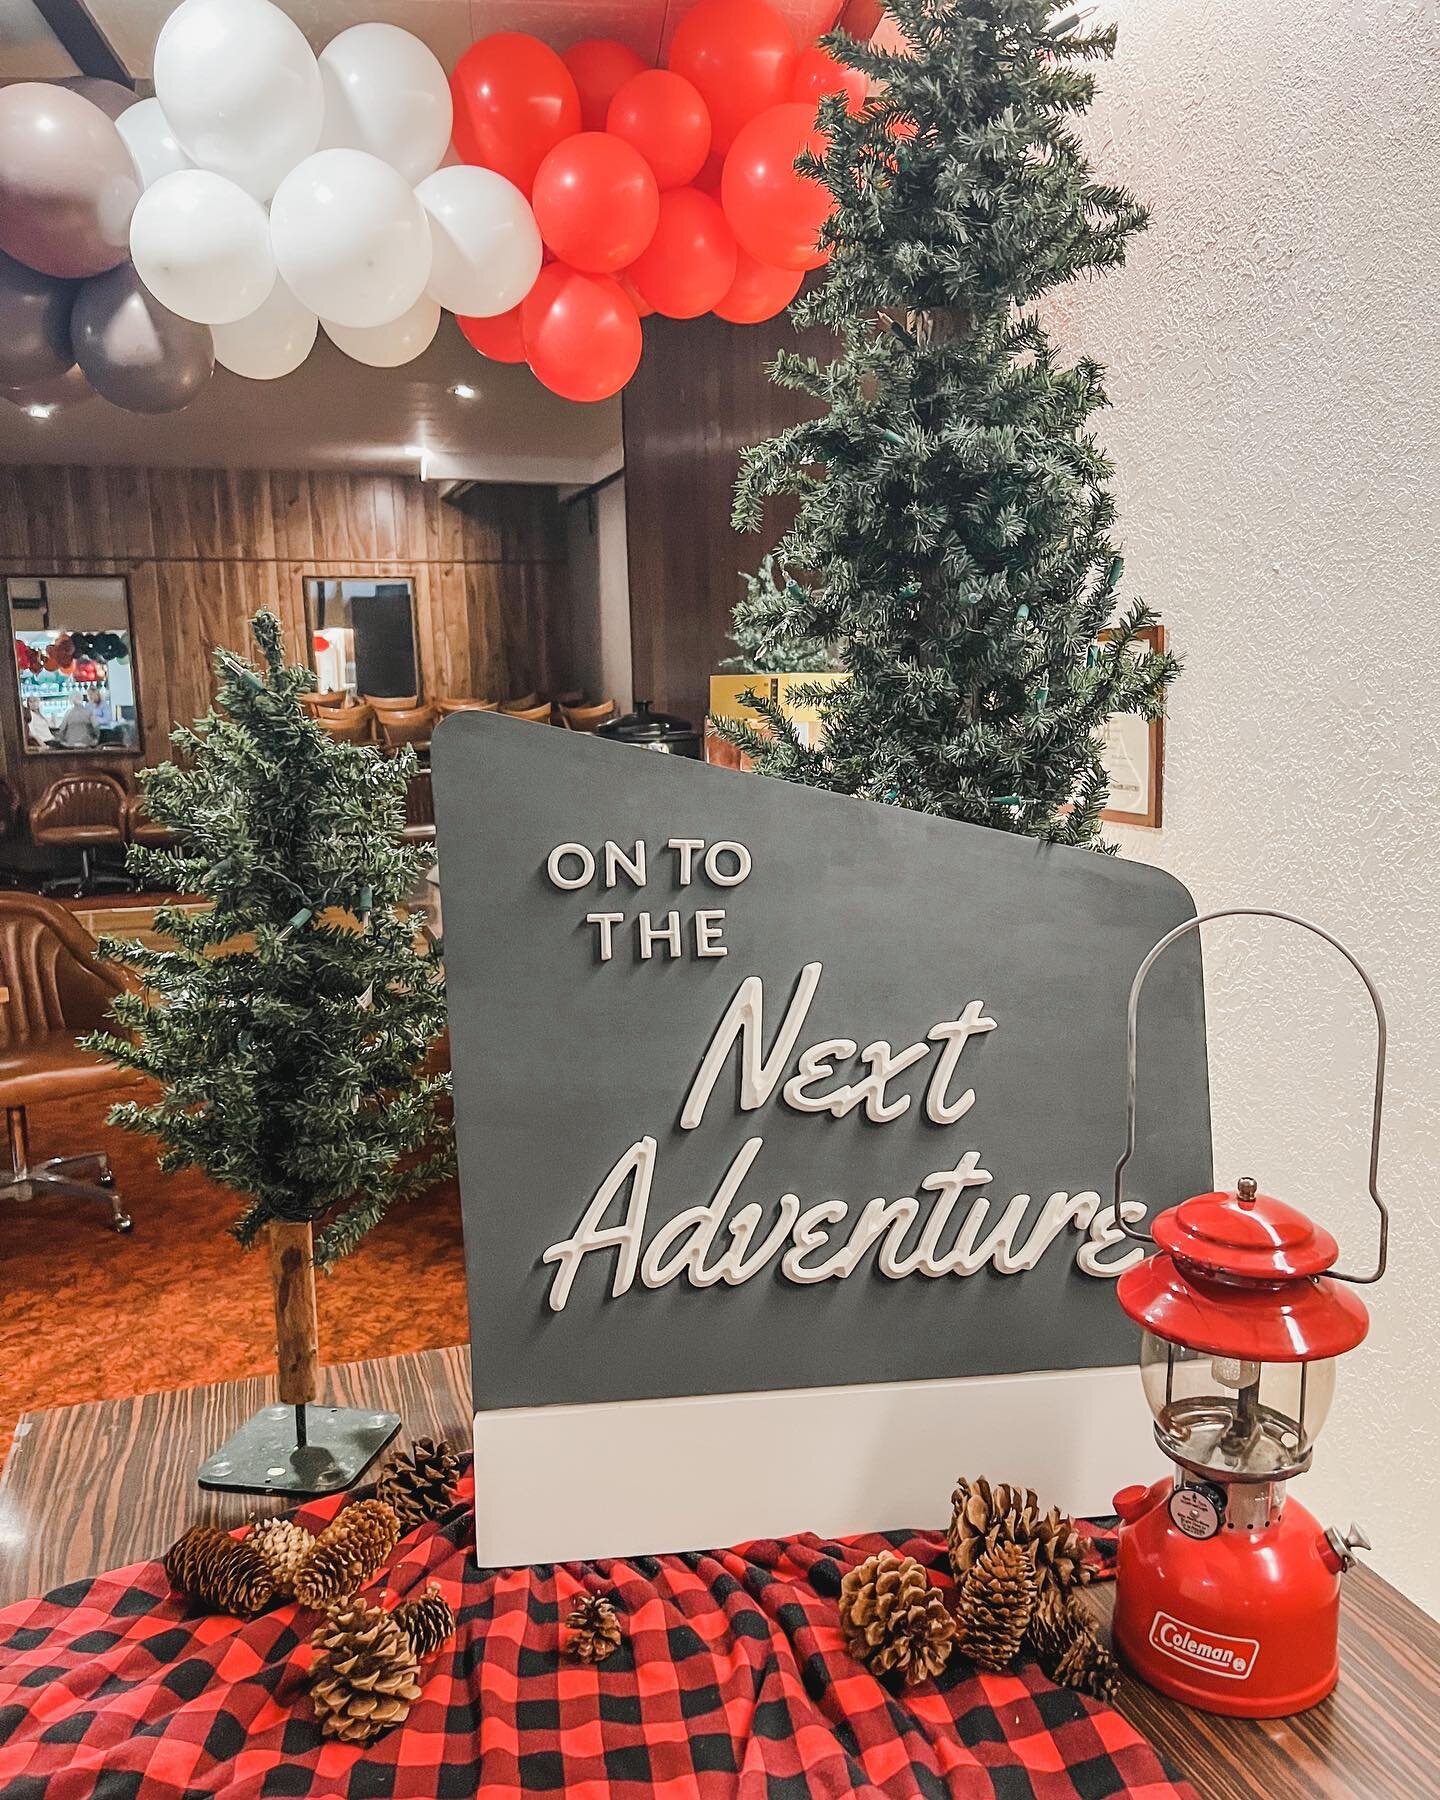 Only the best theme for the best guys retirement party! 

The sign and the cookies 😍😍

*not pictured because I&rsquo;m dumb and suck at taking pictures my vendor for all things party&mdash; @farmerjohnscreative made the invitation, sign design, key